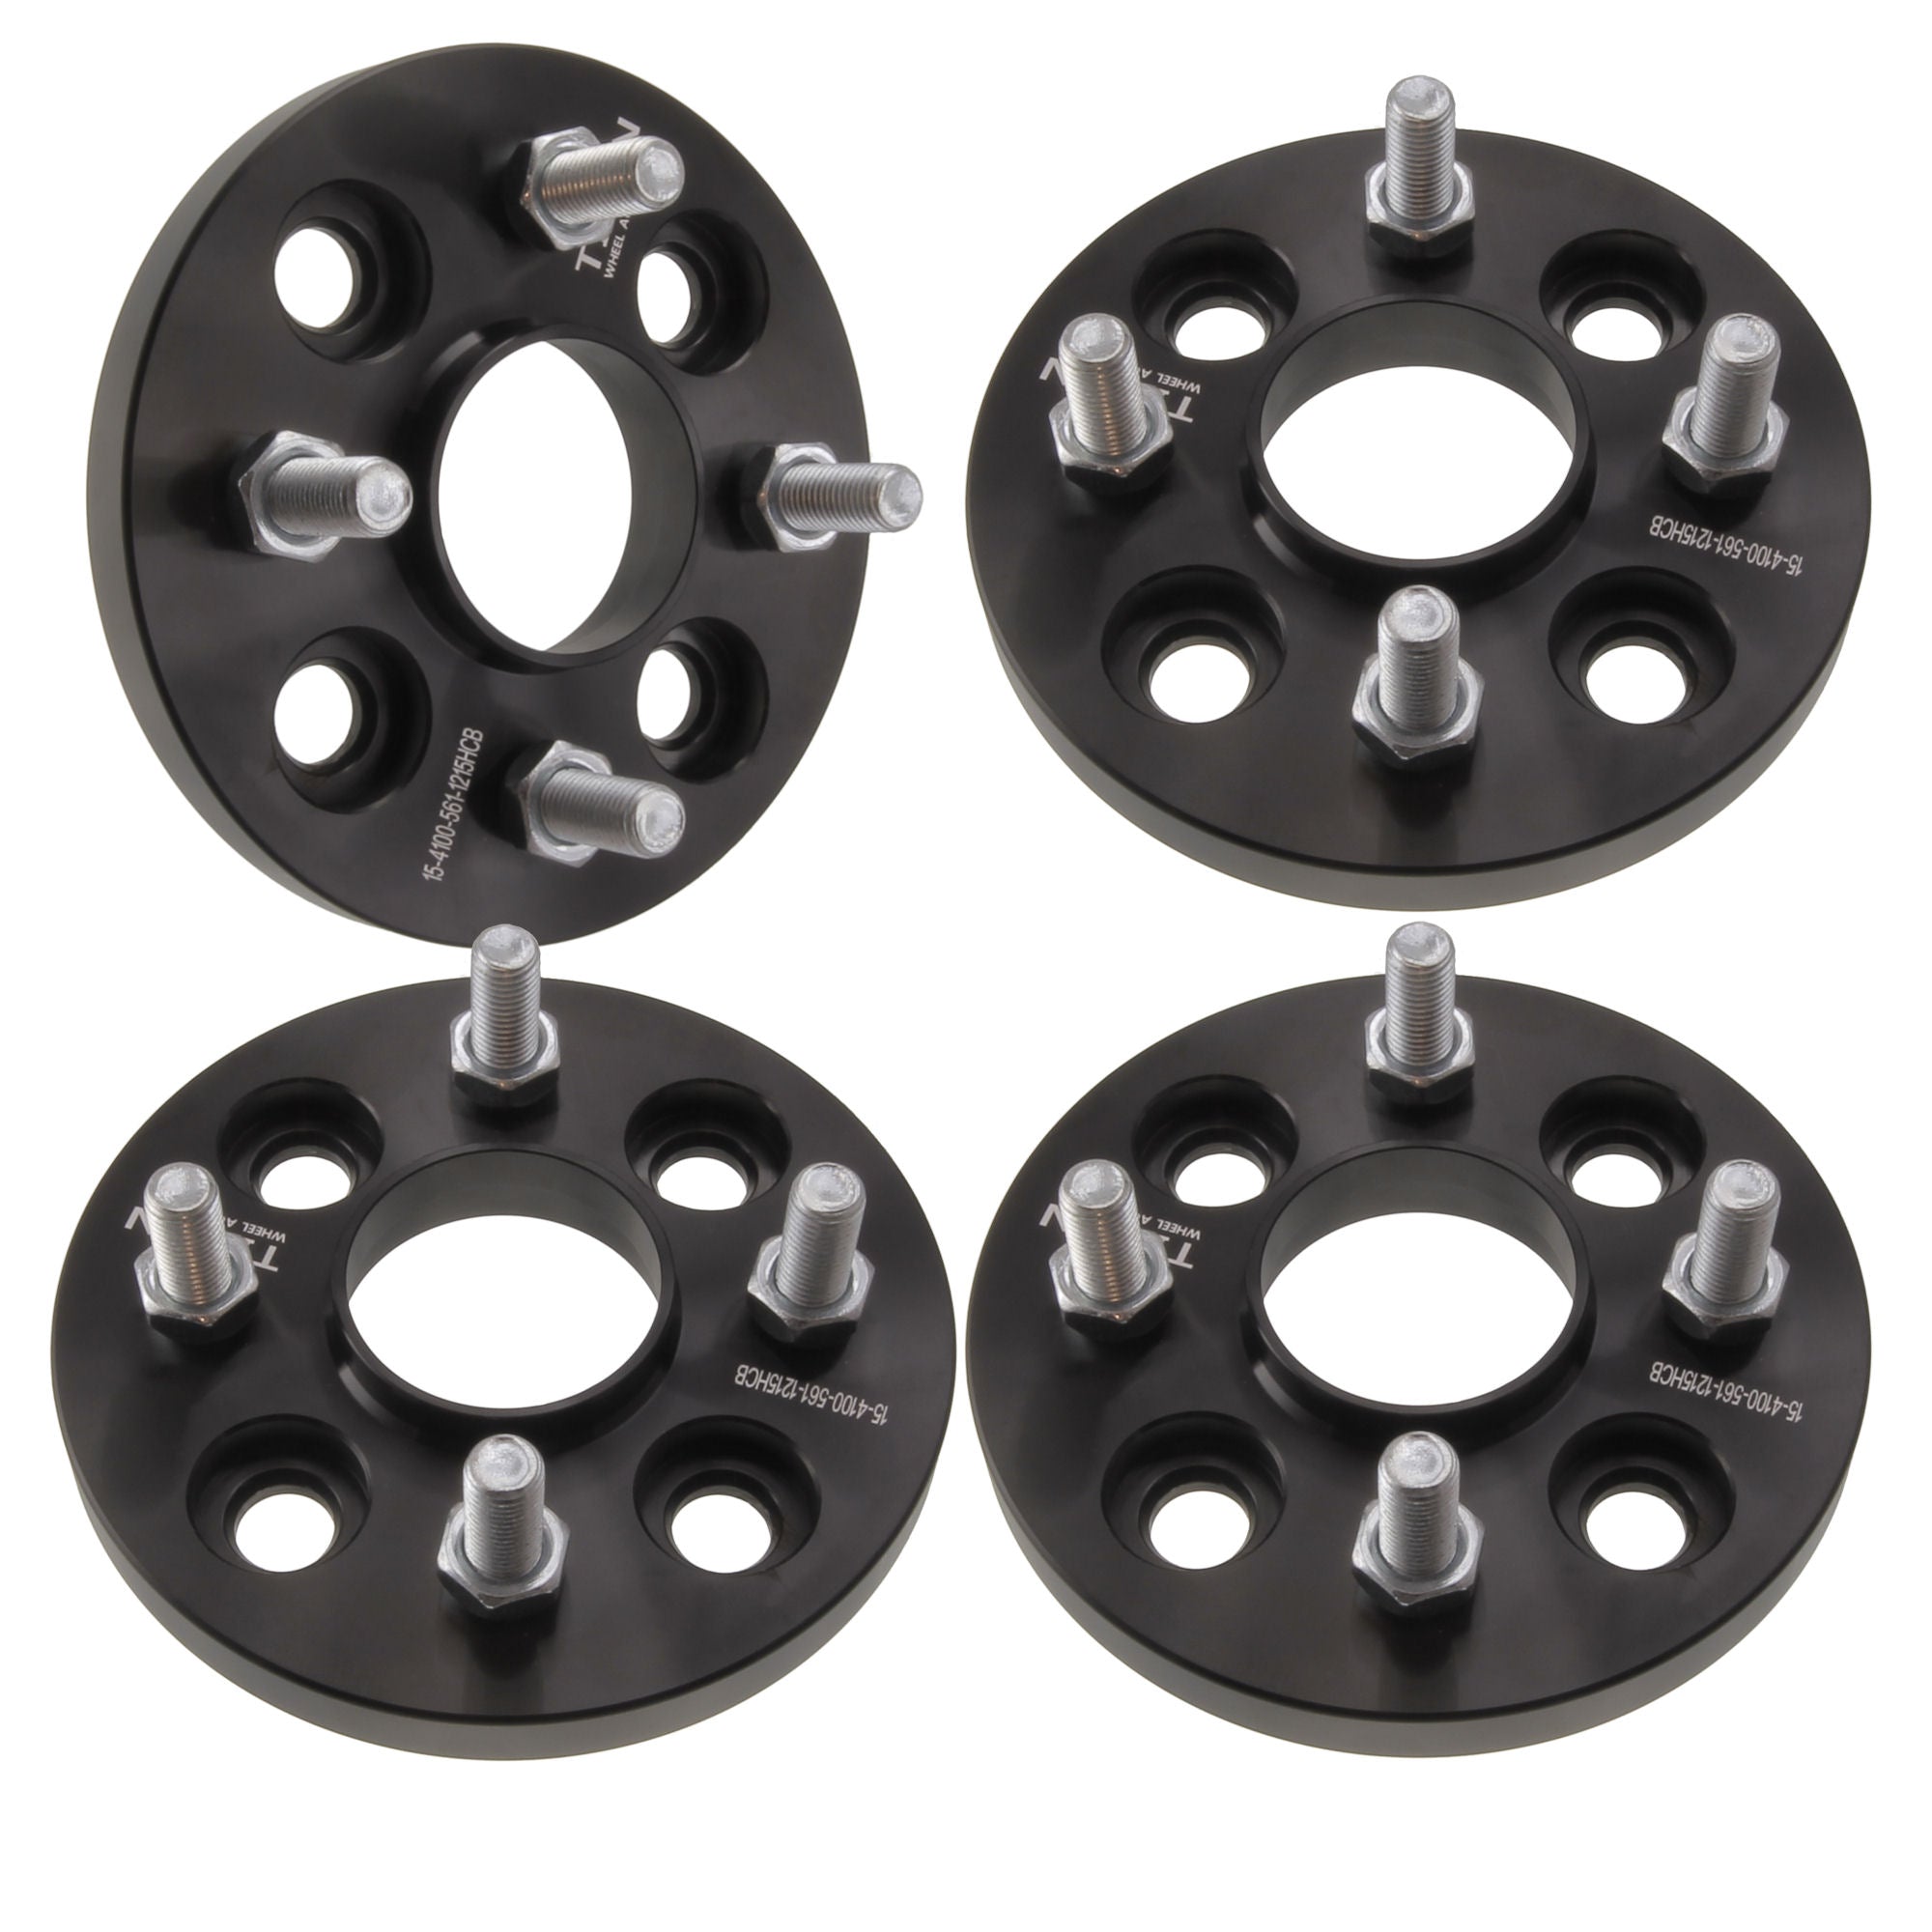 15mm Hubcentric Wheel Spacers for Honda Civic Lancer | 4x100 | Titan Wheel  Accessories